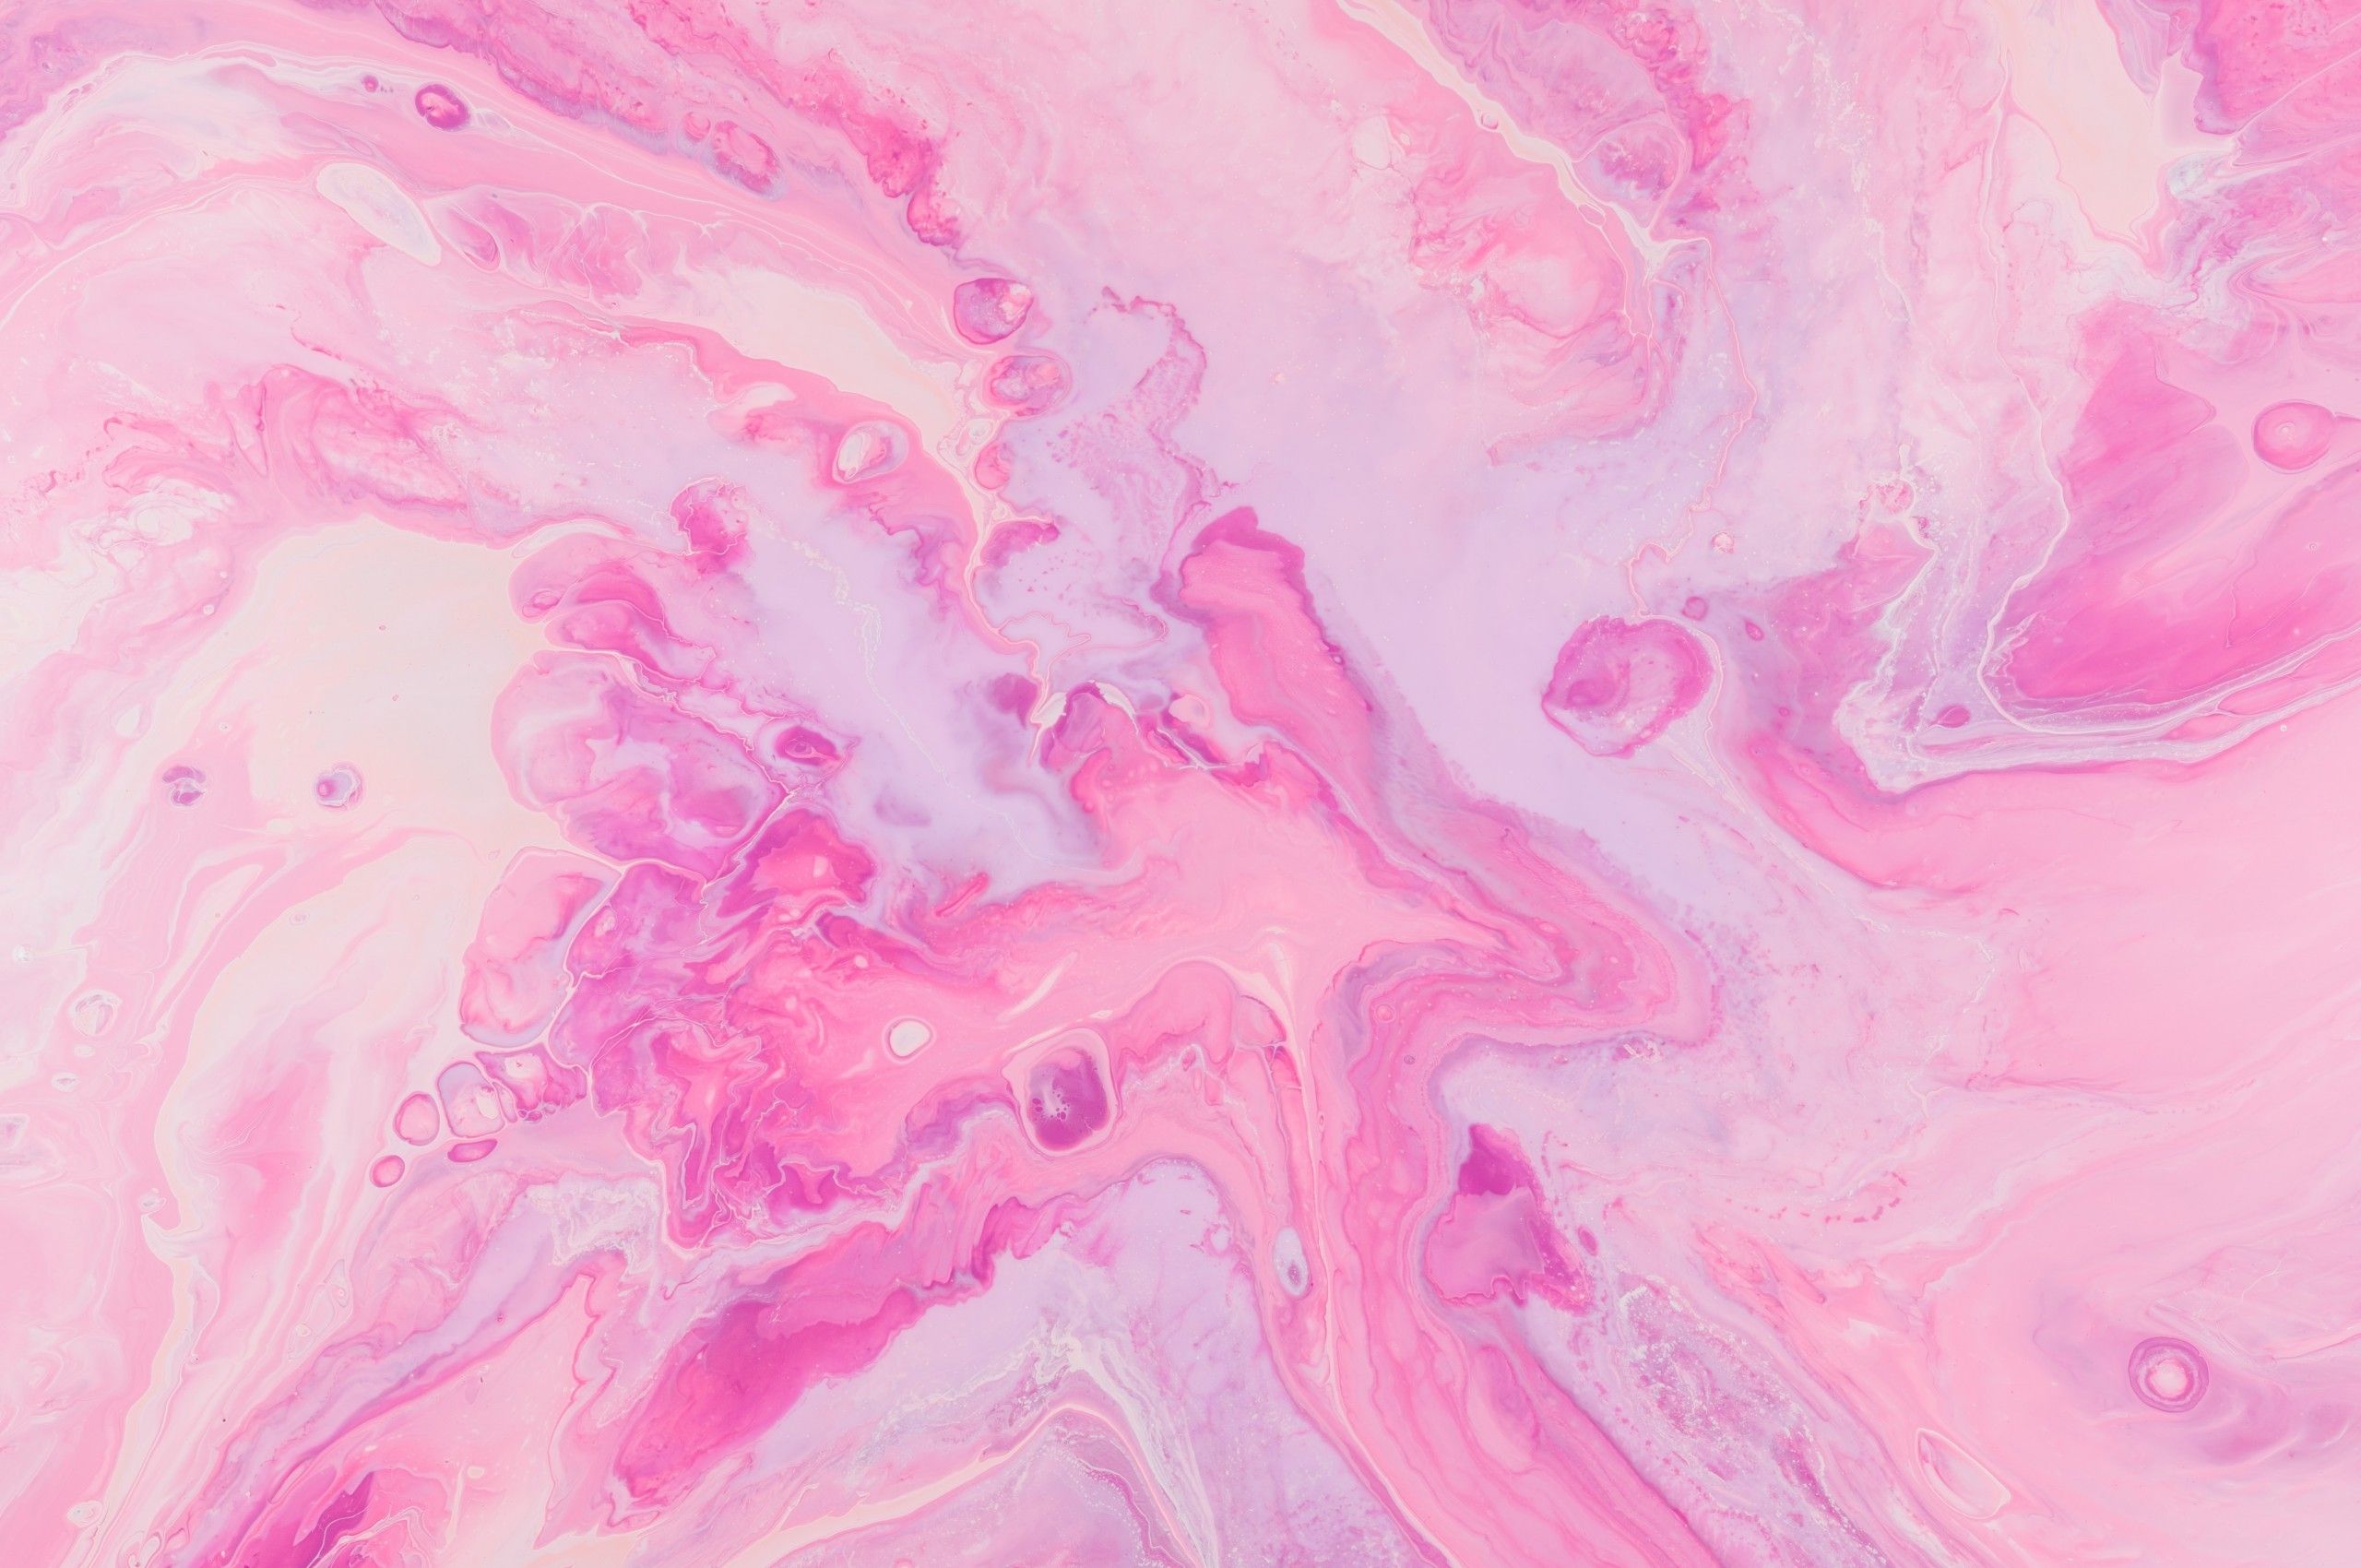 Download 2560x1700 Pink Liquid, Stain Texture, Pattern, Bubbles Wallpaper for Chromebook Pixel